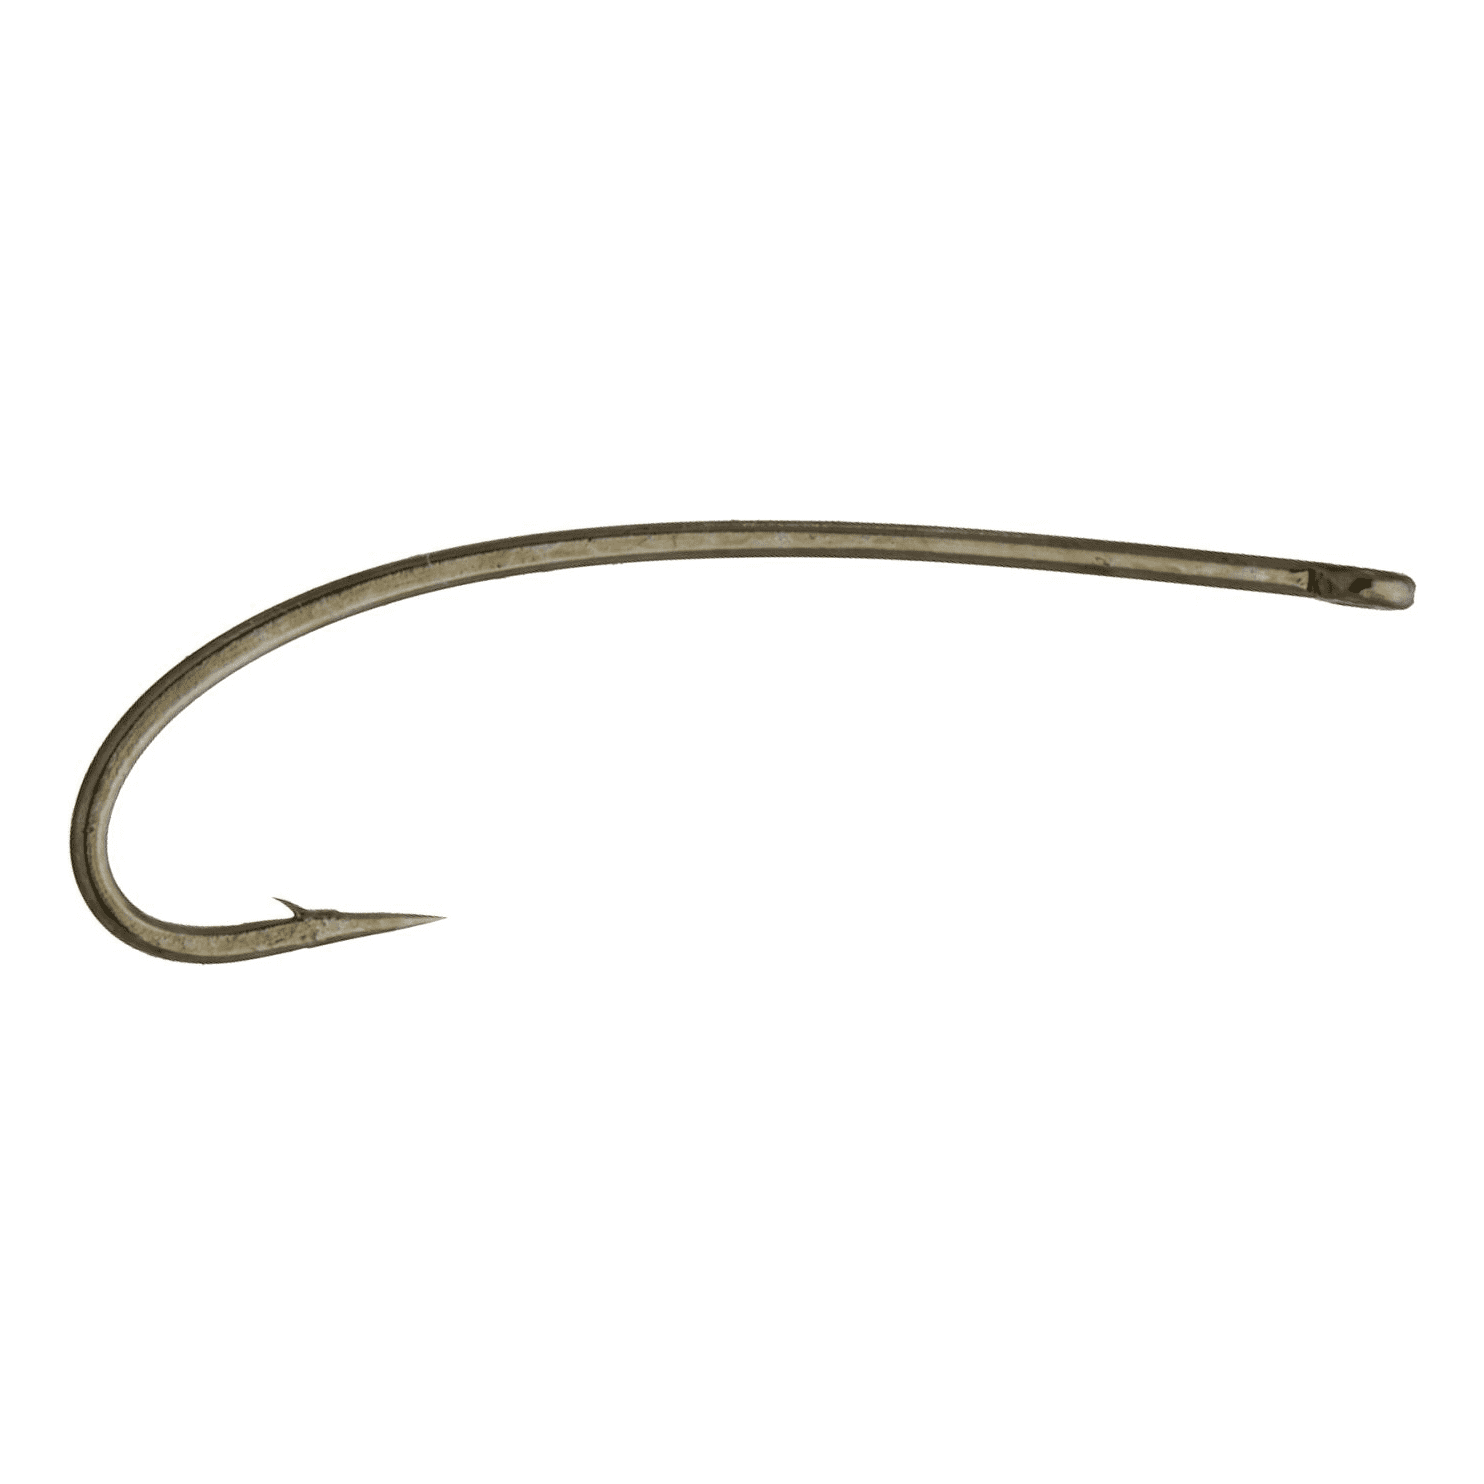 White River Fly Shop® All-Purpose Curved Shank Fly Hook